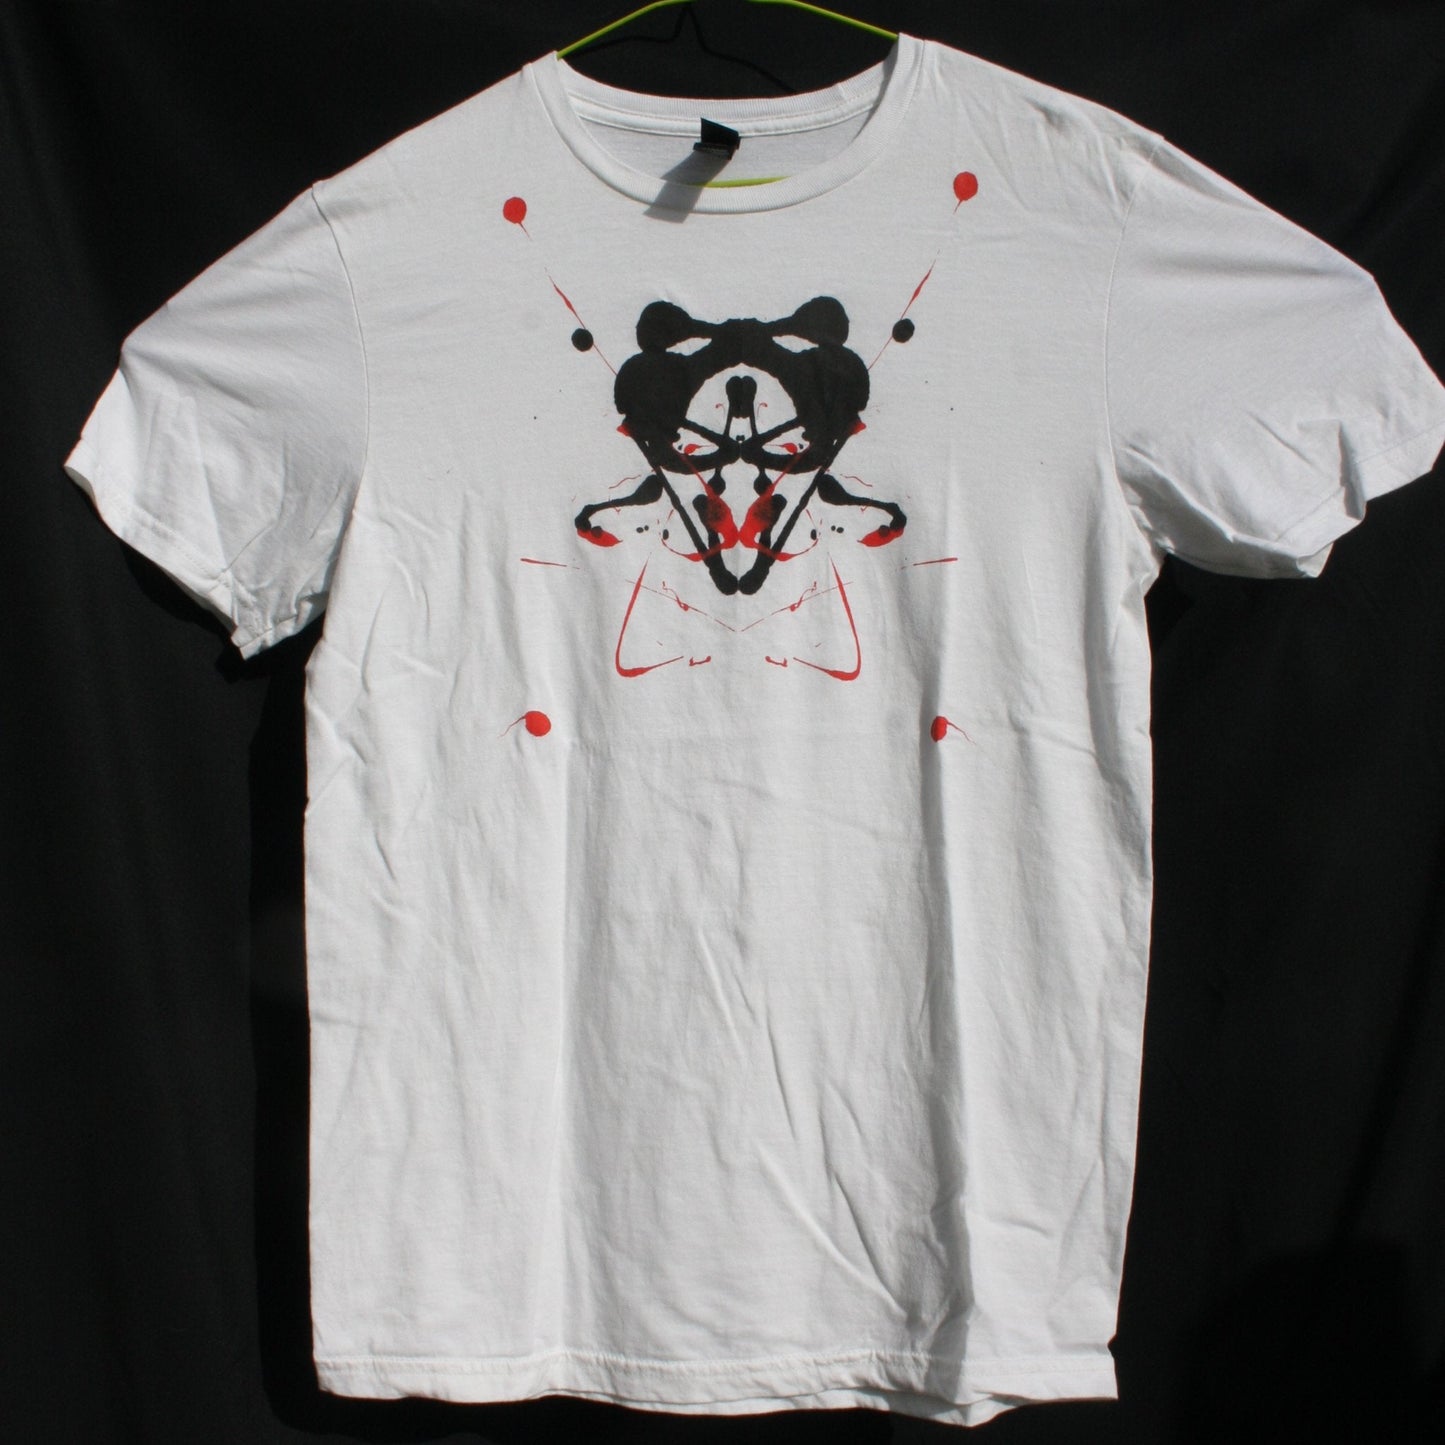 Rorschach, White cotton T-Shirt with Black & Red ink blot - Small #1 (RW BR S1) - ElRatDesigns - T Shirt